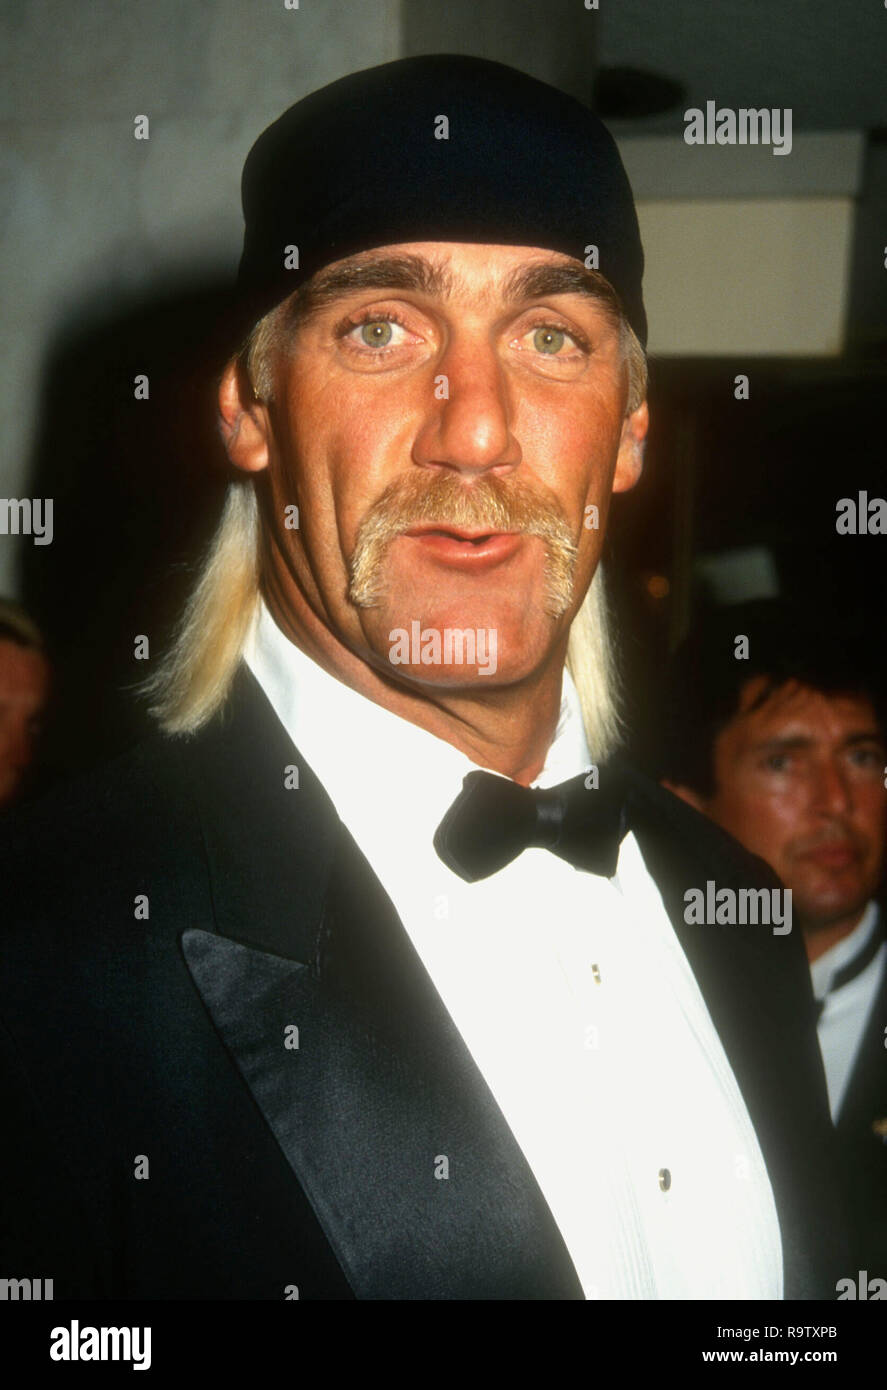 BEVERLY HILLS, CA - JUNE 24: American professional wrestler Hulk Hogan, aka Terry Gene Bollea attends RP International's 20th Annual Vision Awards on June 24, 1993 at the Regent Beverly Wilshire Hotel in Beverly Hills, California. Photo by Barry King/Alamy Stock Photo Stock Photo